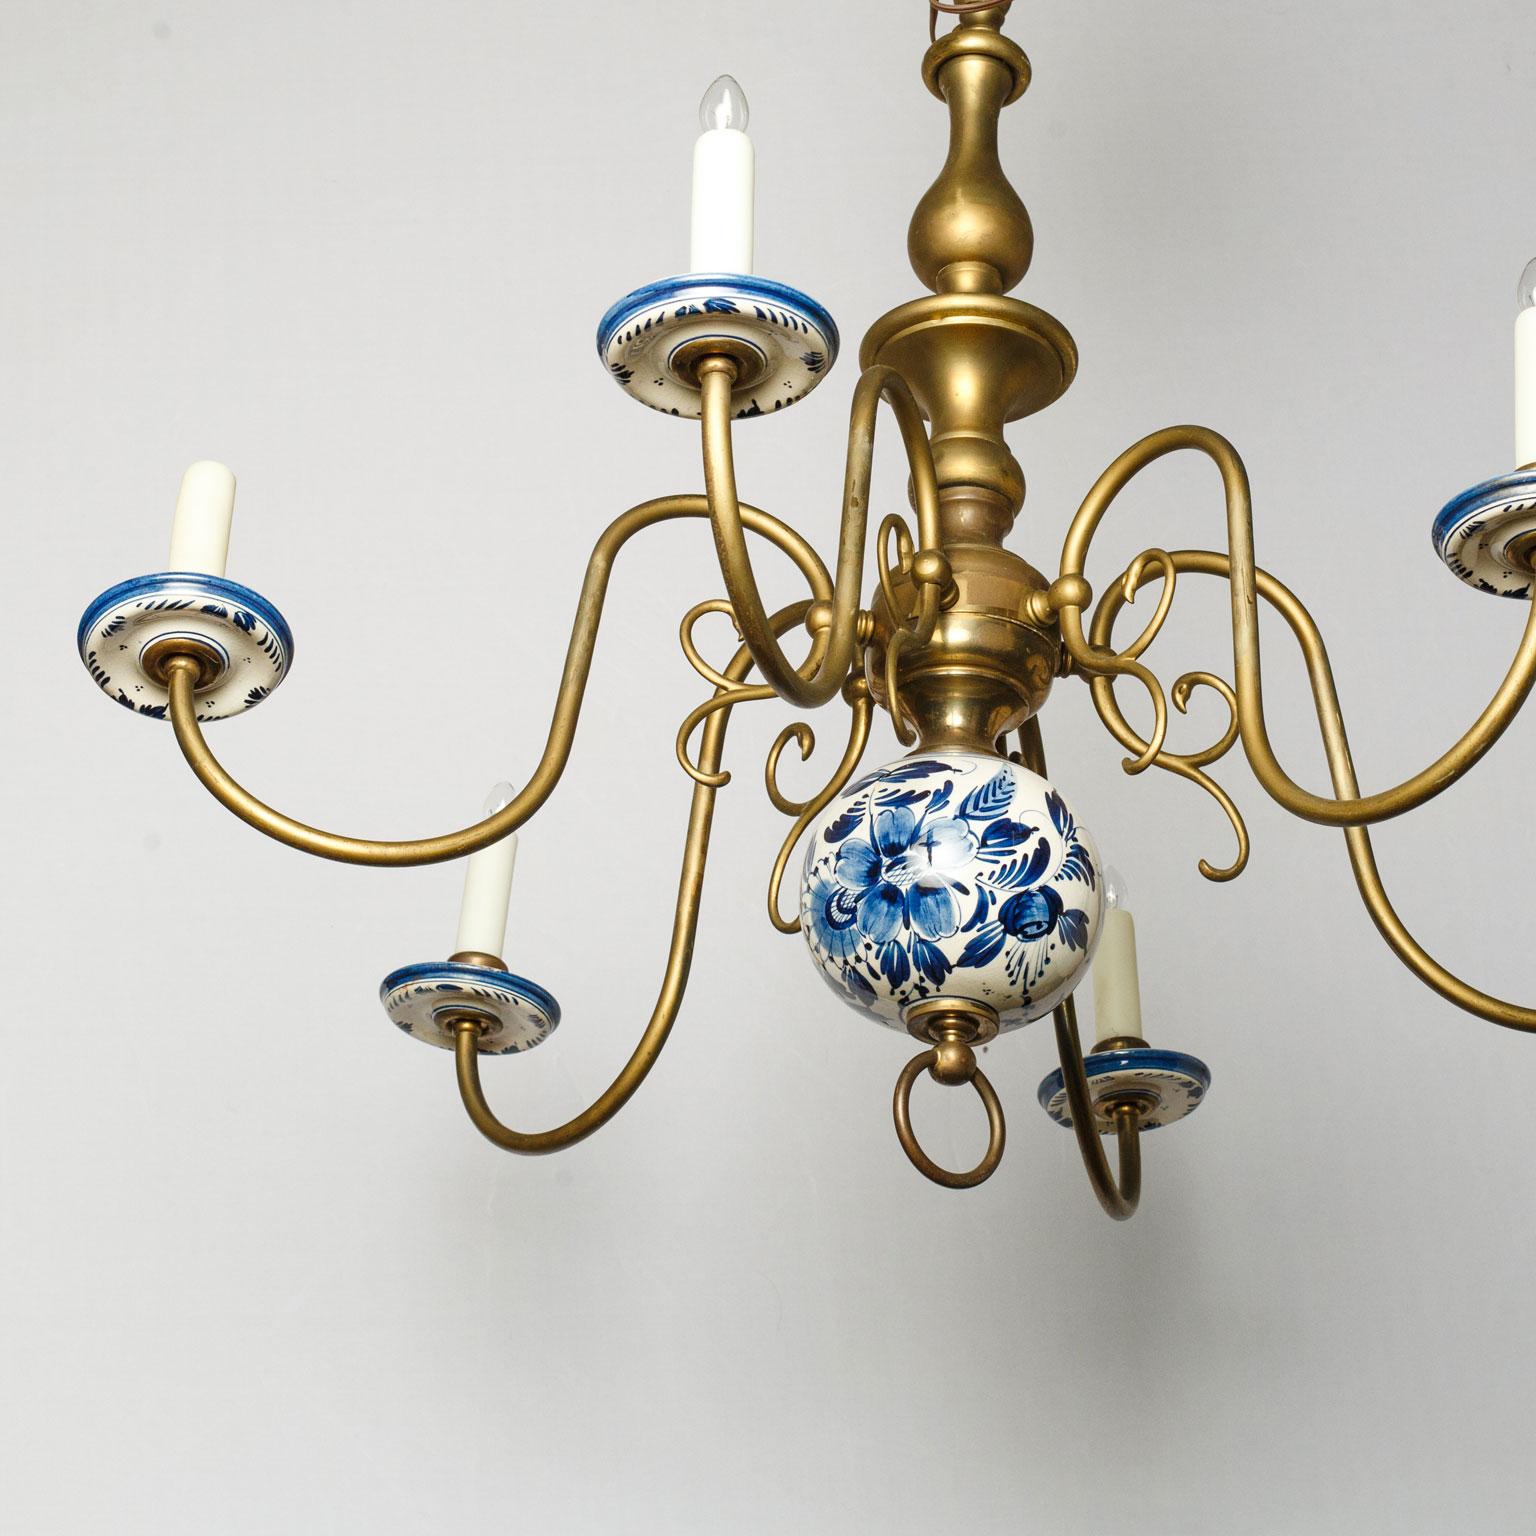 Cast Spectacular Delft and Bronze Chandelier For Sale